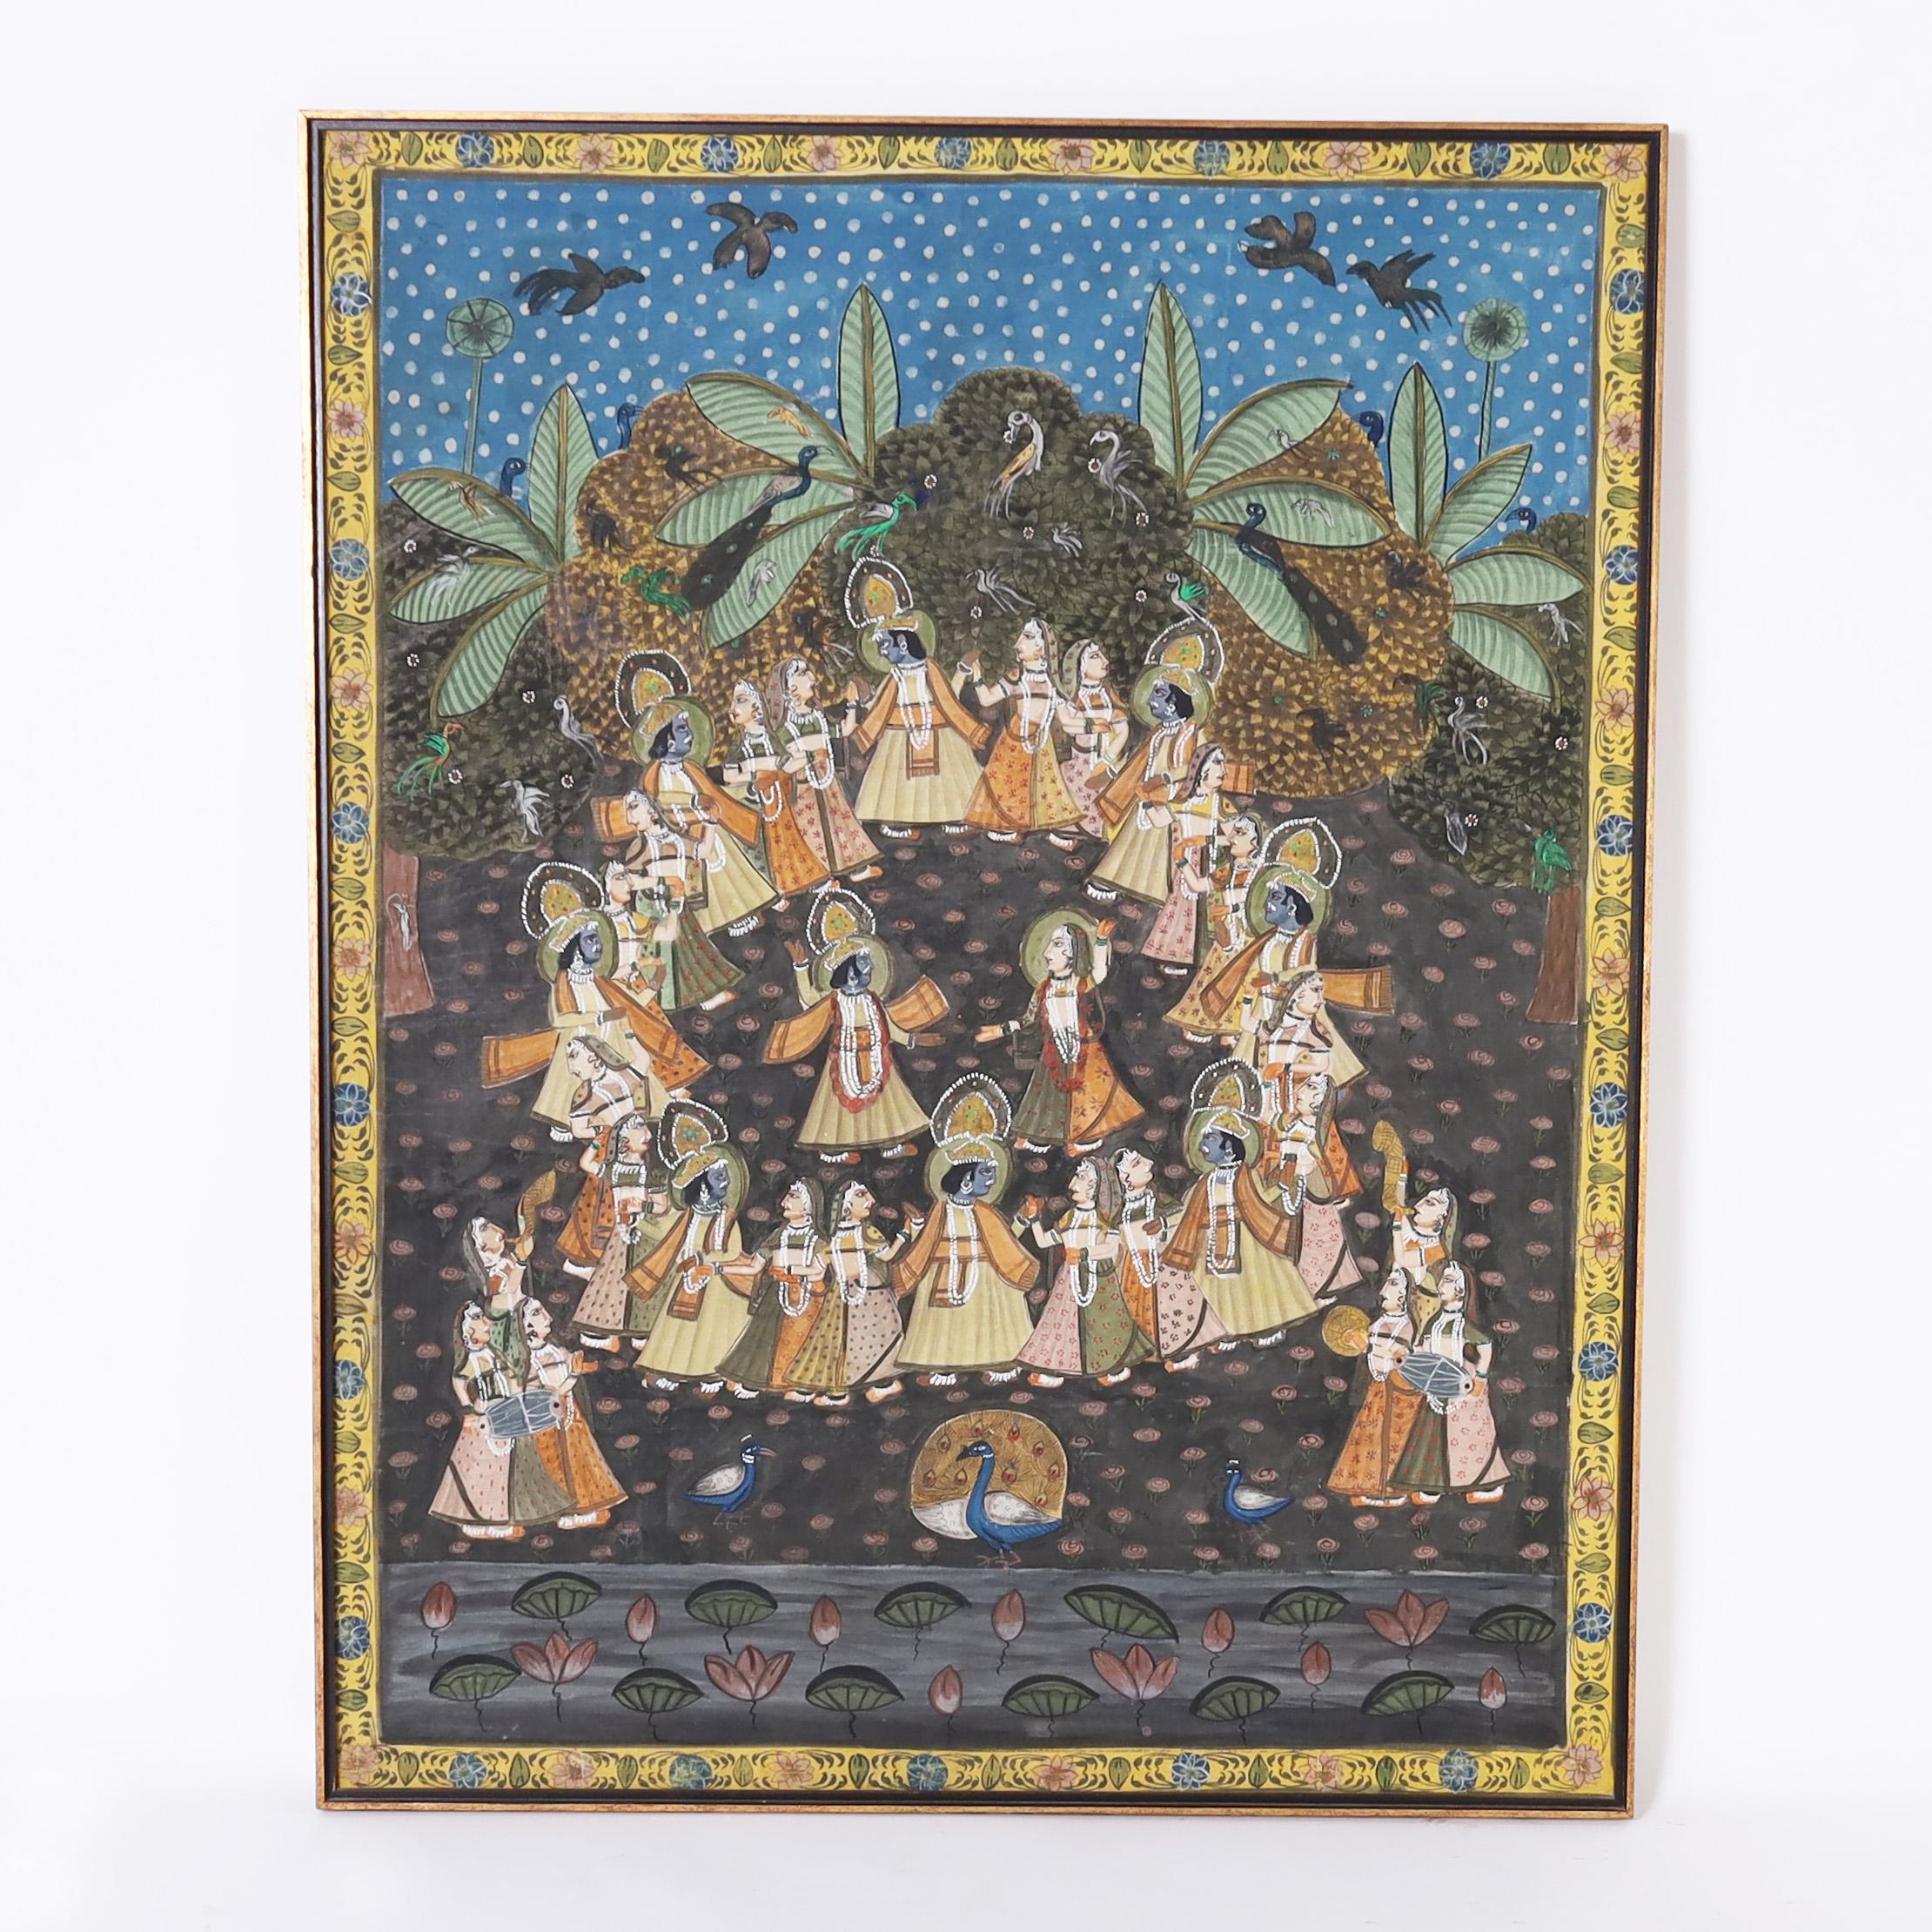 Enchanting vintage Anglo Indian Pishhwai gouache painting on cloth mounted on board, steeped in alagorical context, depicting Krishna dancing with villagers in a background of birds and trees. Presented in the original mahogany frame.